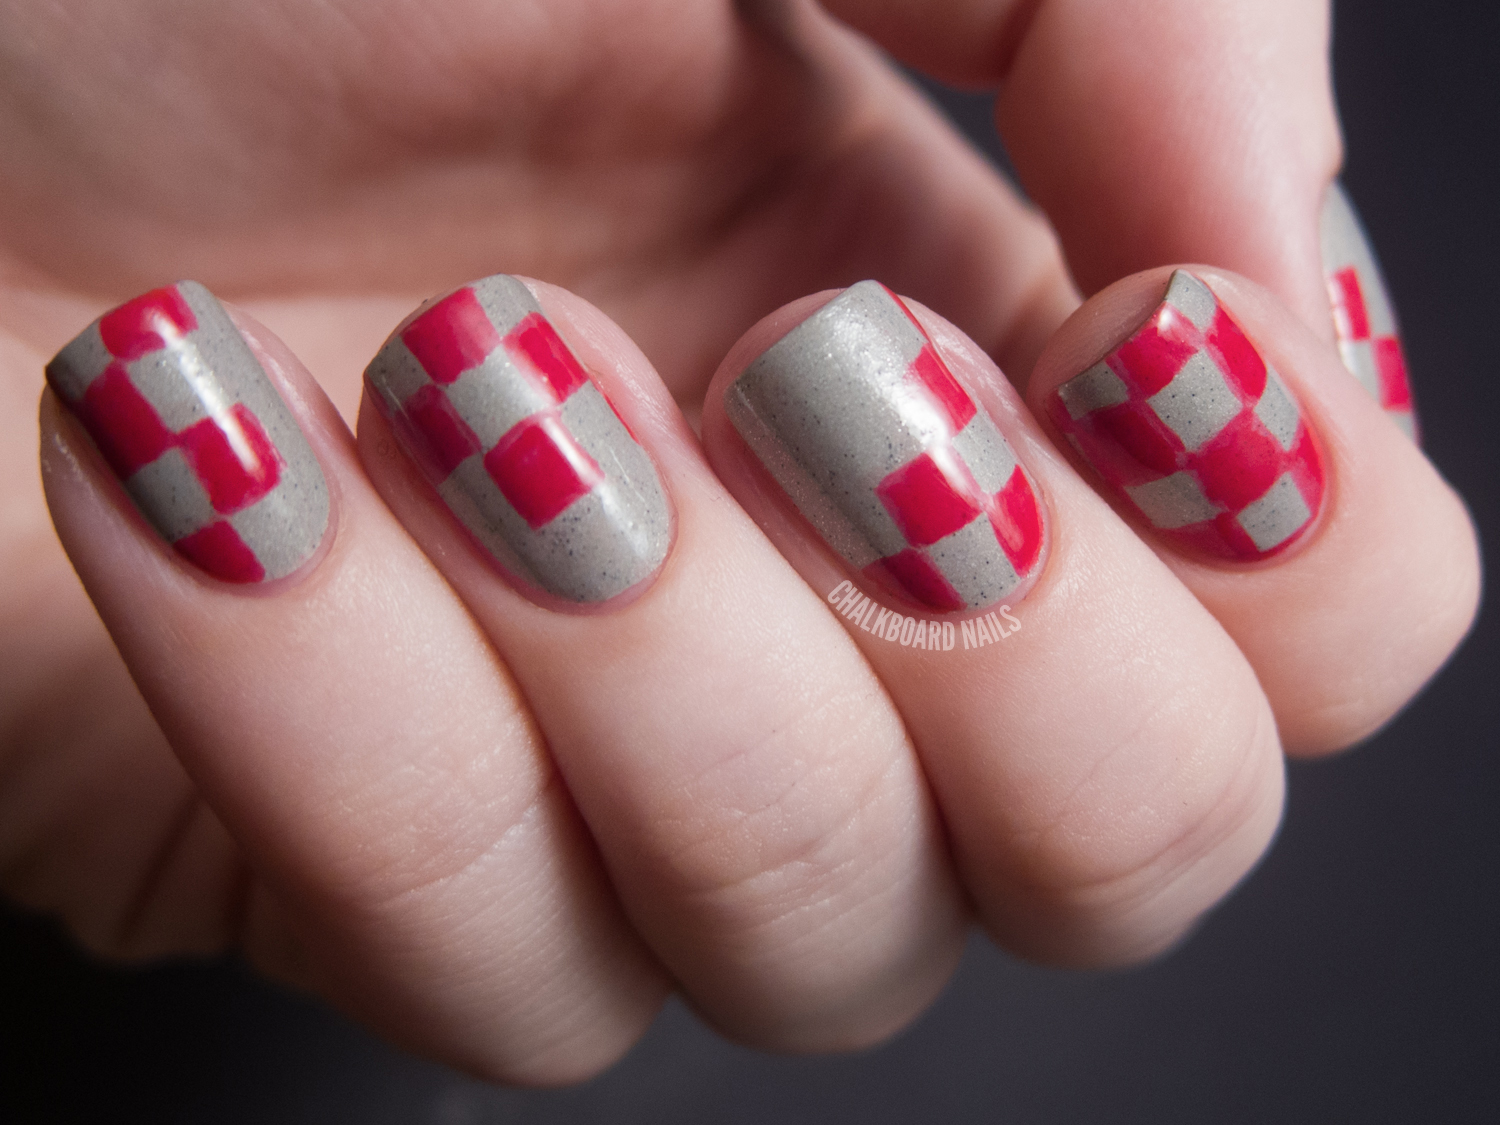 to do pattern nails i decided to do checkerboard nails